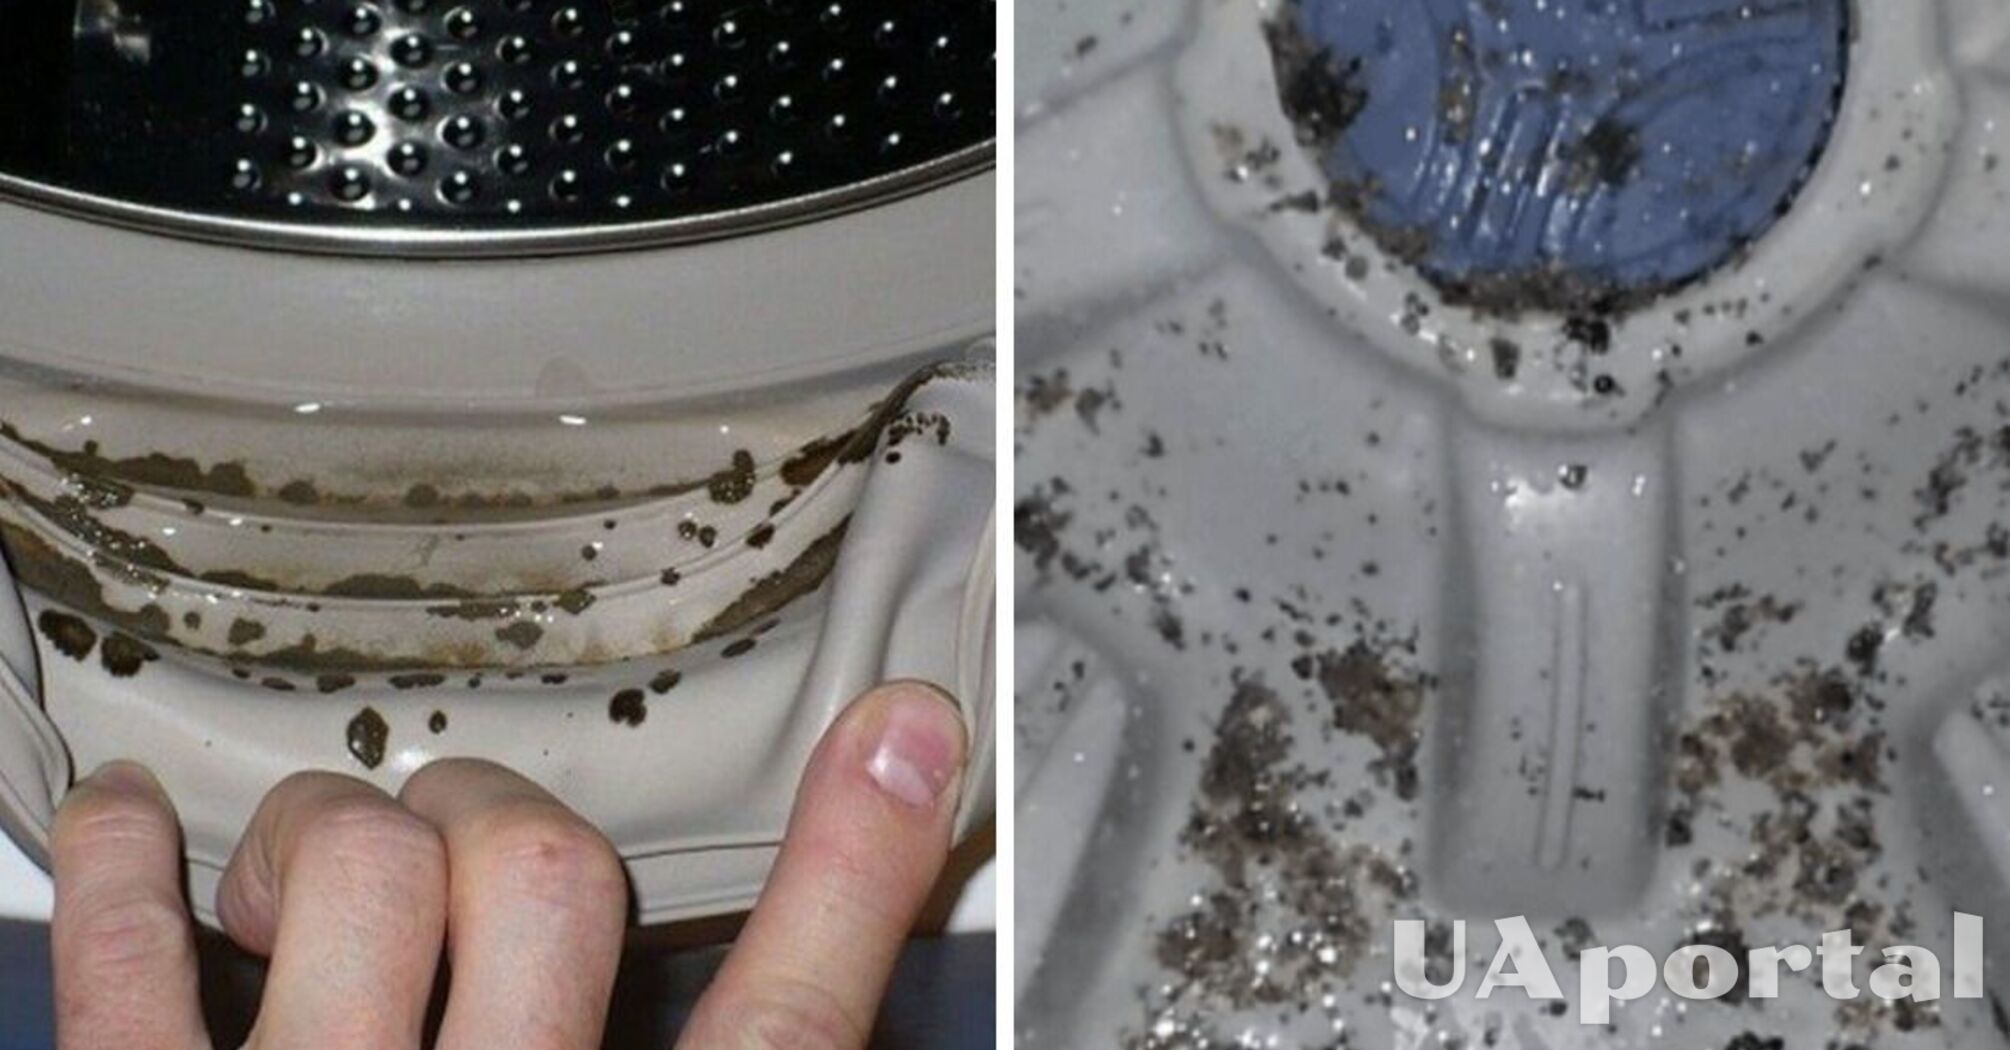 How to clean a washing machine from mold